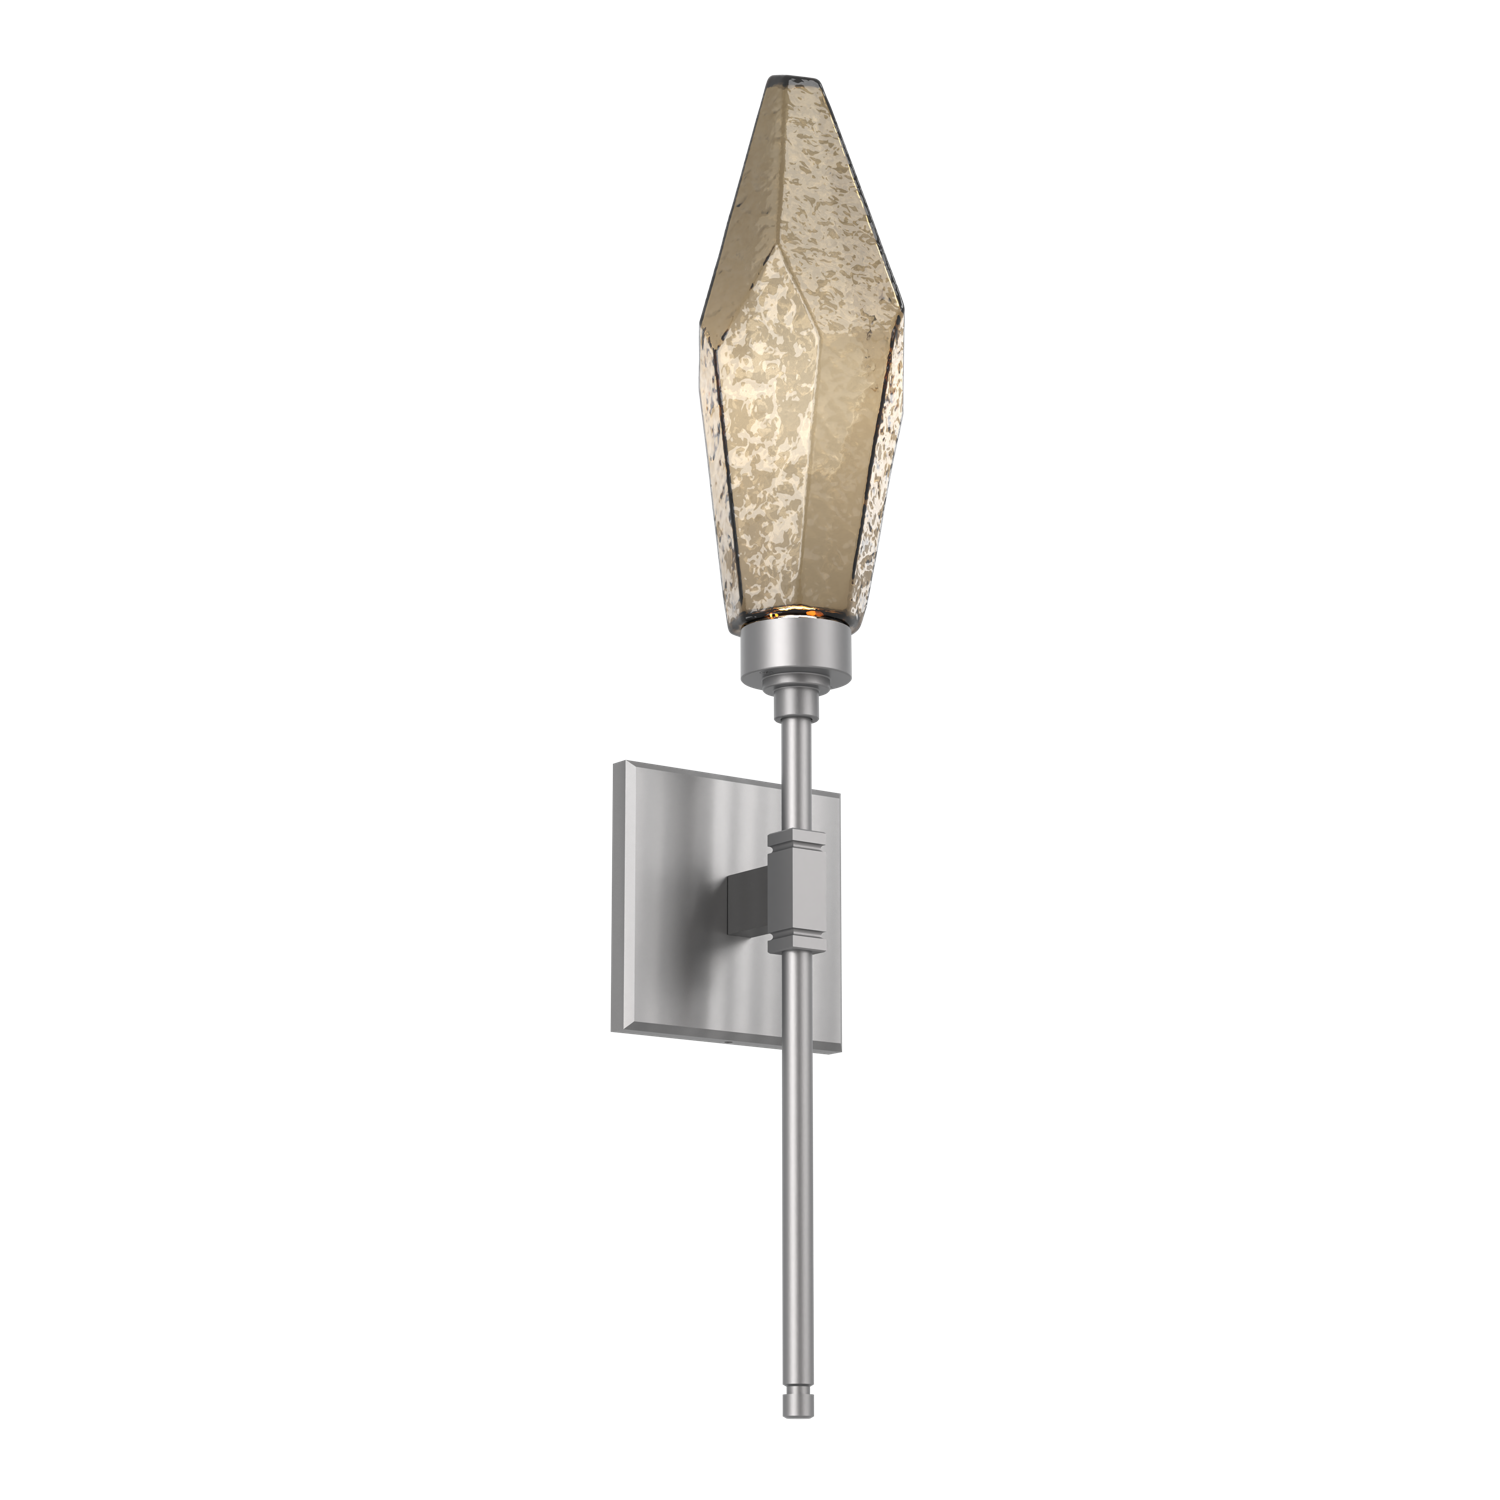 IDB0050-04-SN-CB-Hammerton-Studio-Rock-Crystal-ada-certified-belvedere-wall-sconce-with-satin-nickel-finish-and-chilled-bronze-blown-glass-shades-and-LED-lamping